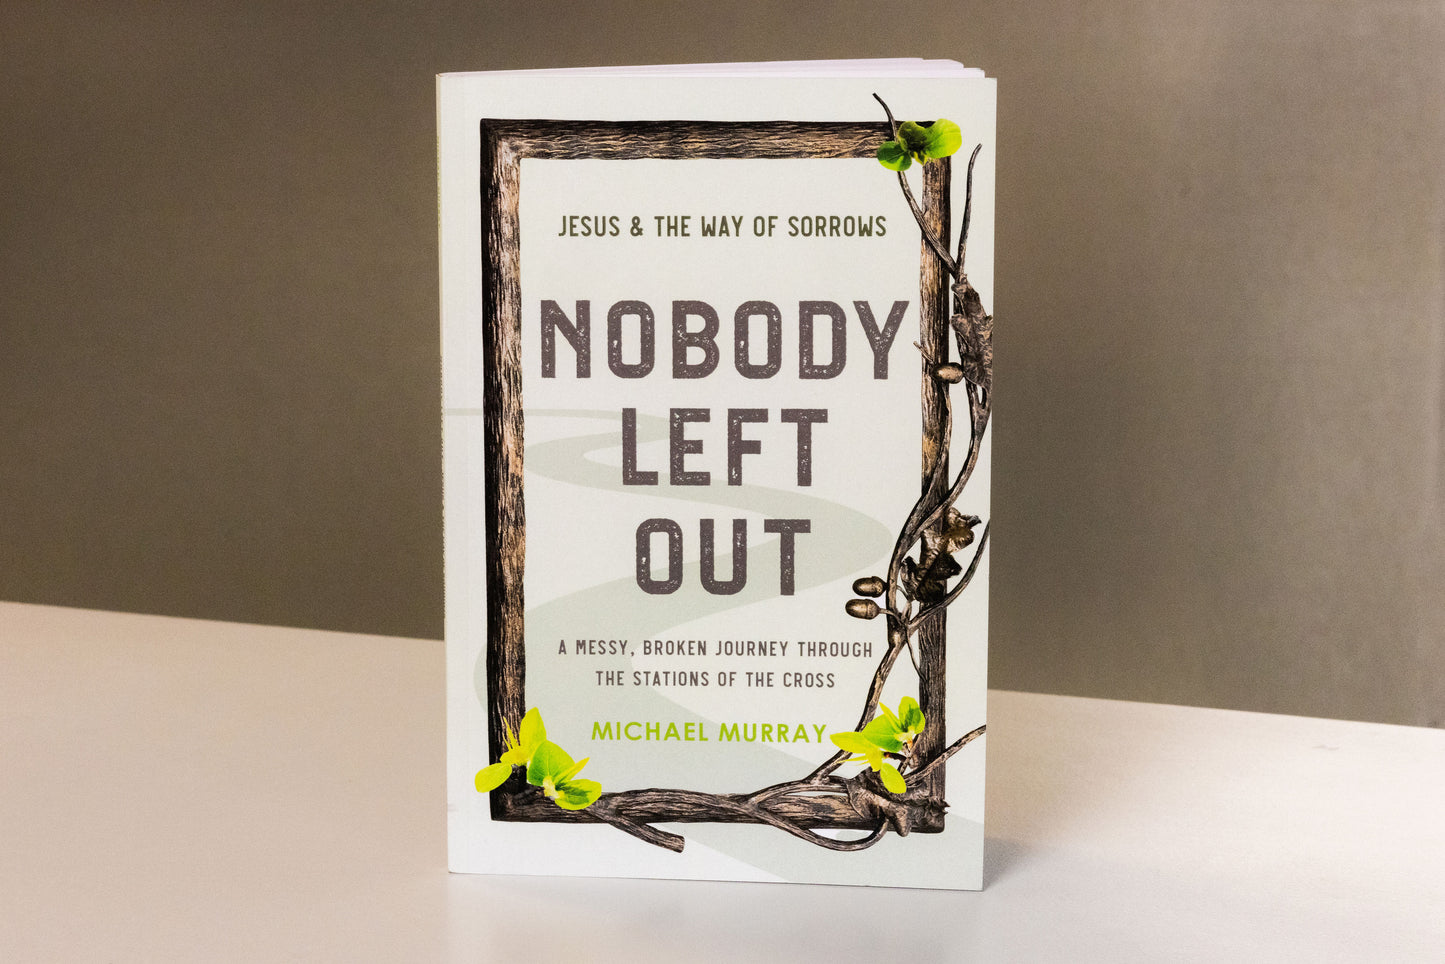 Nobody Left Out: Jesus & the Way of Sorrows: A Messy, Broken Journey Through the Stations of the Cross